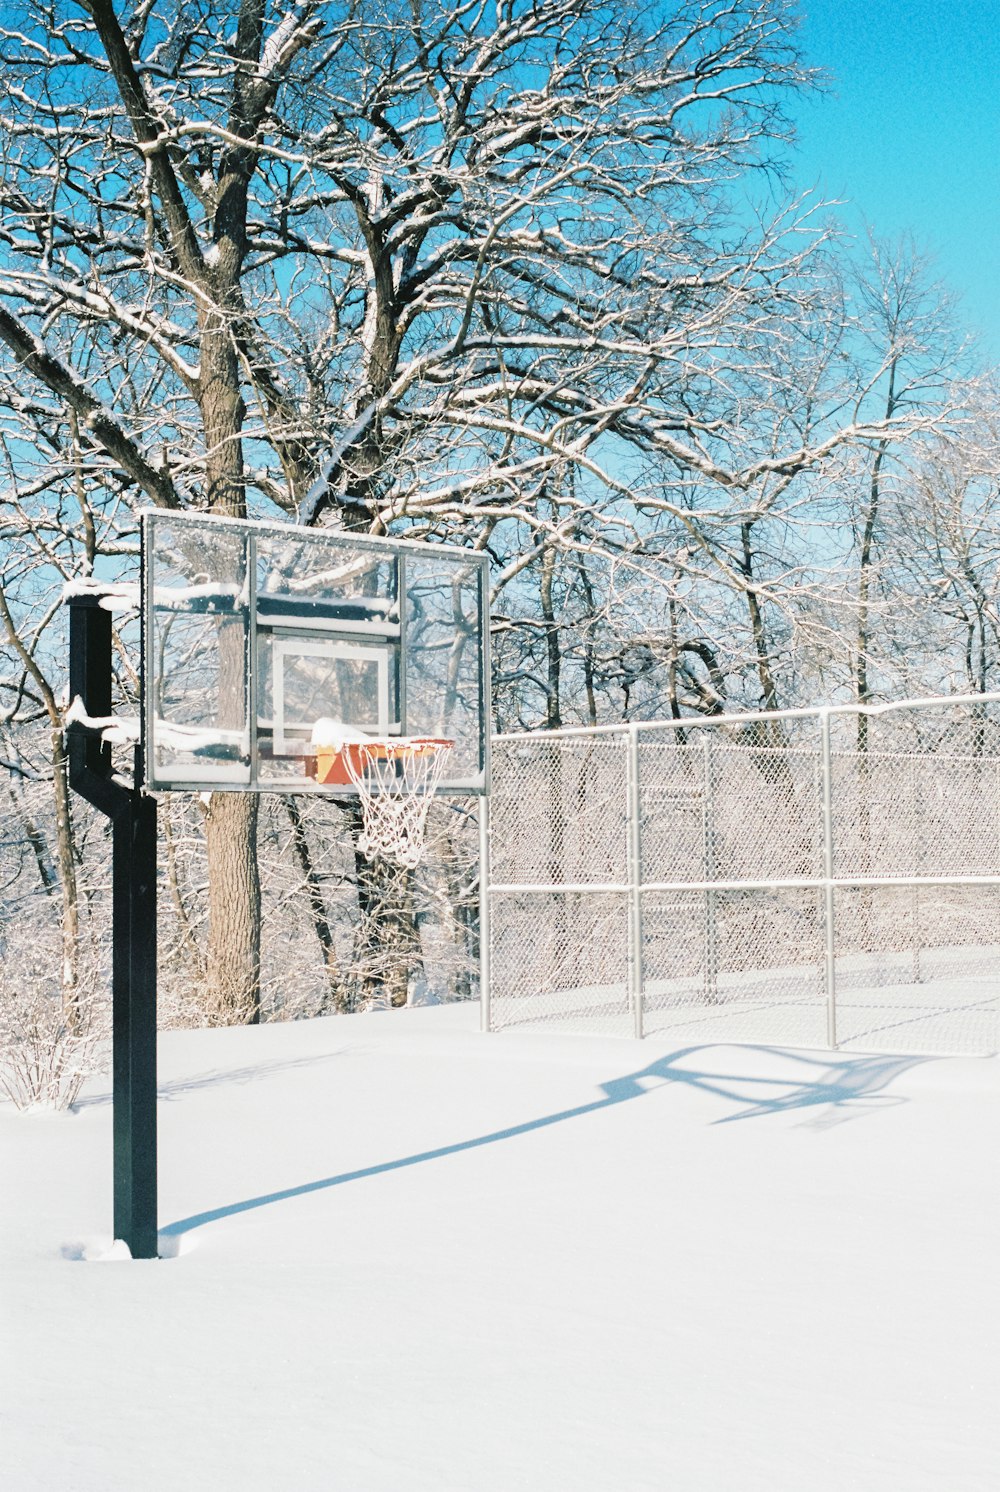 a basketball hoop in the snow near a tree